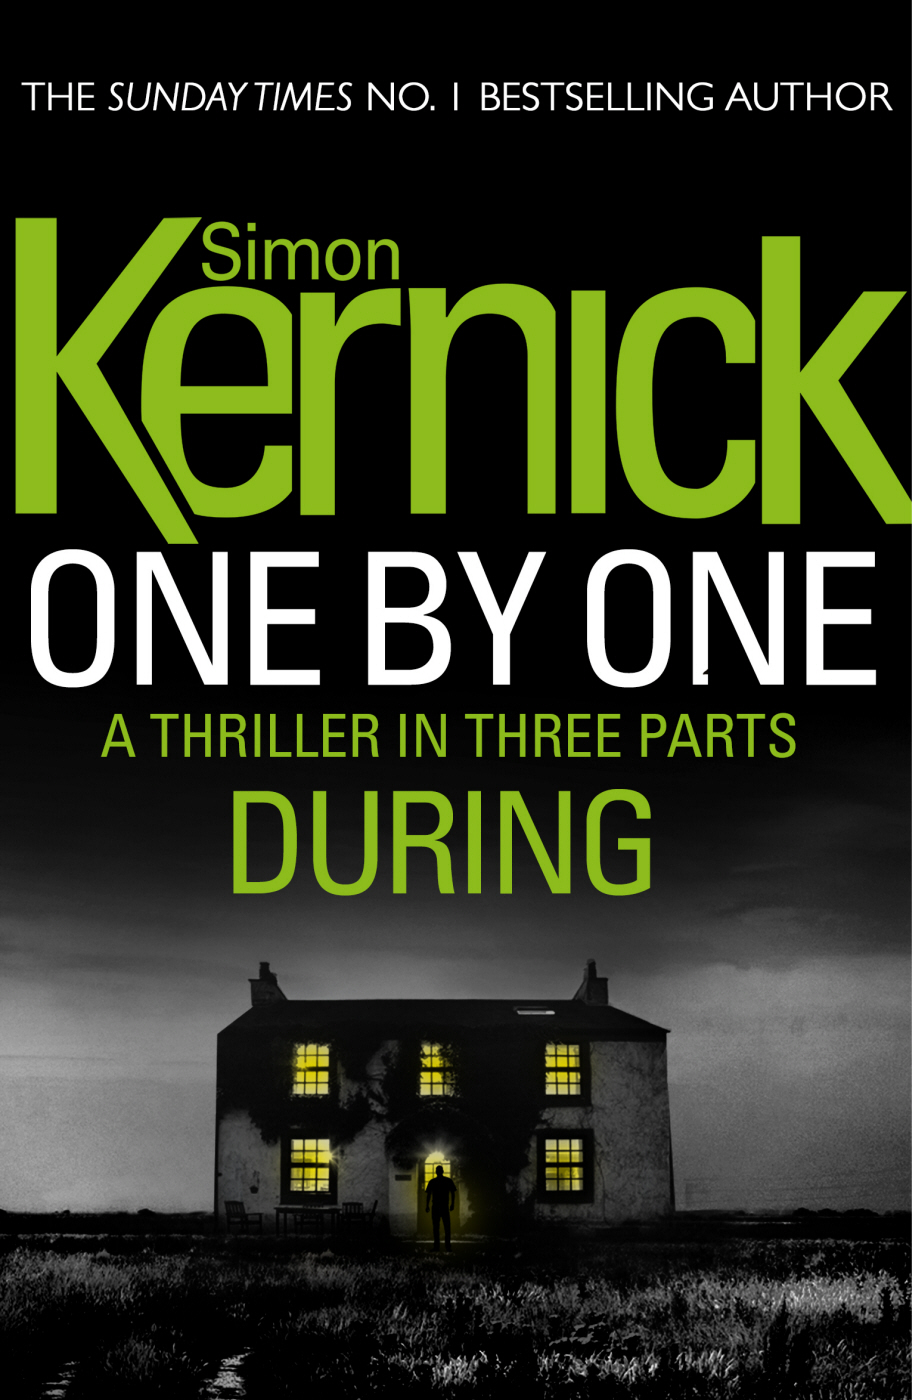 One by One by Simon Kernick